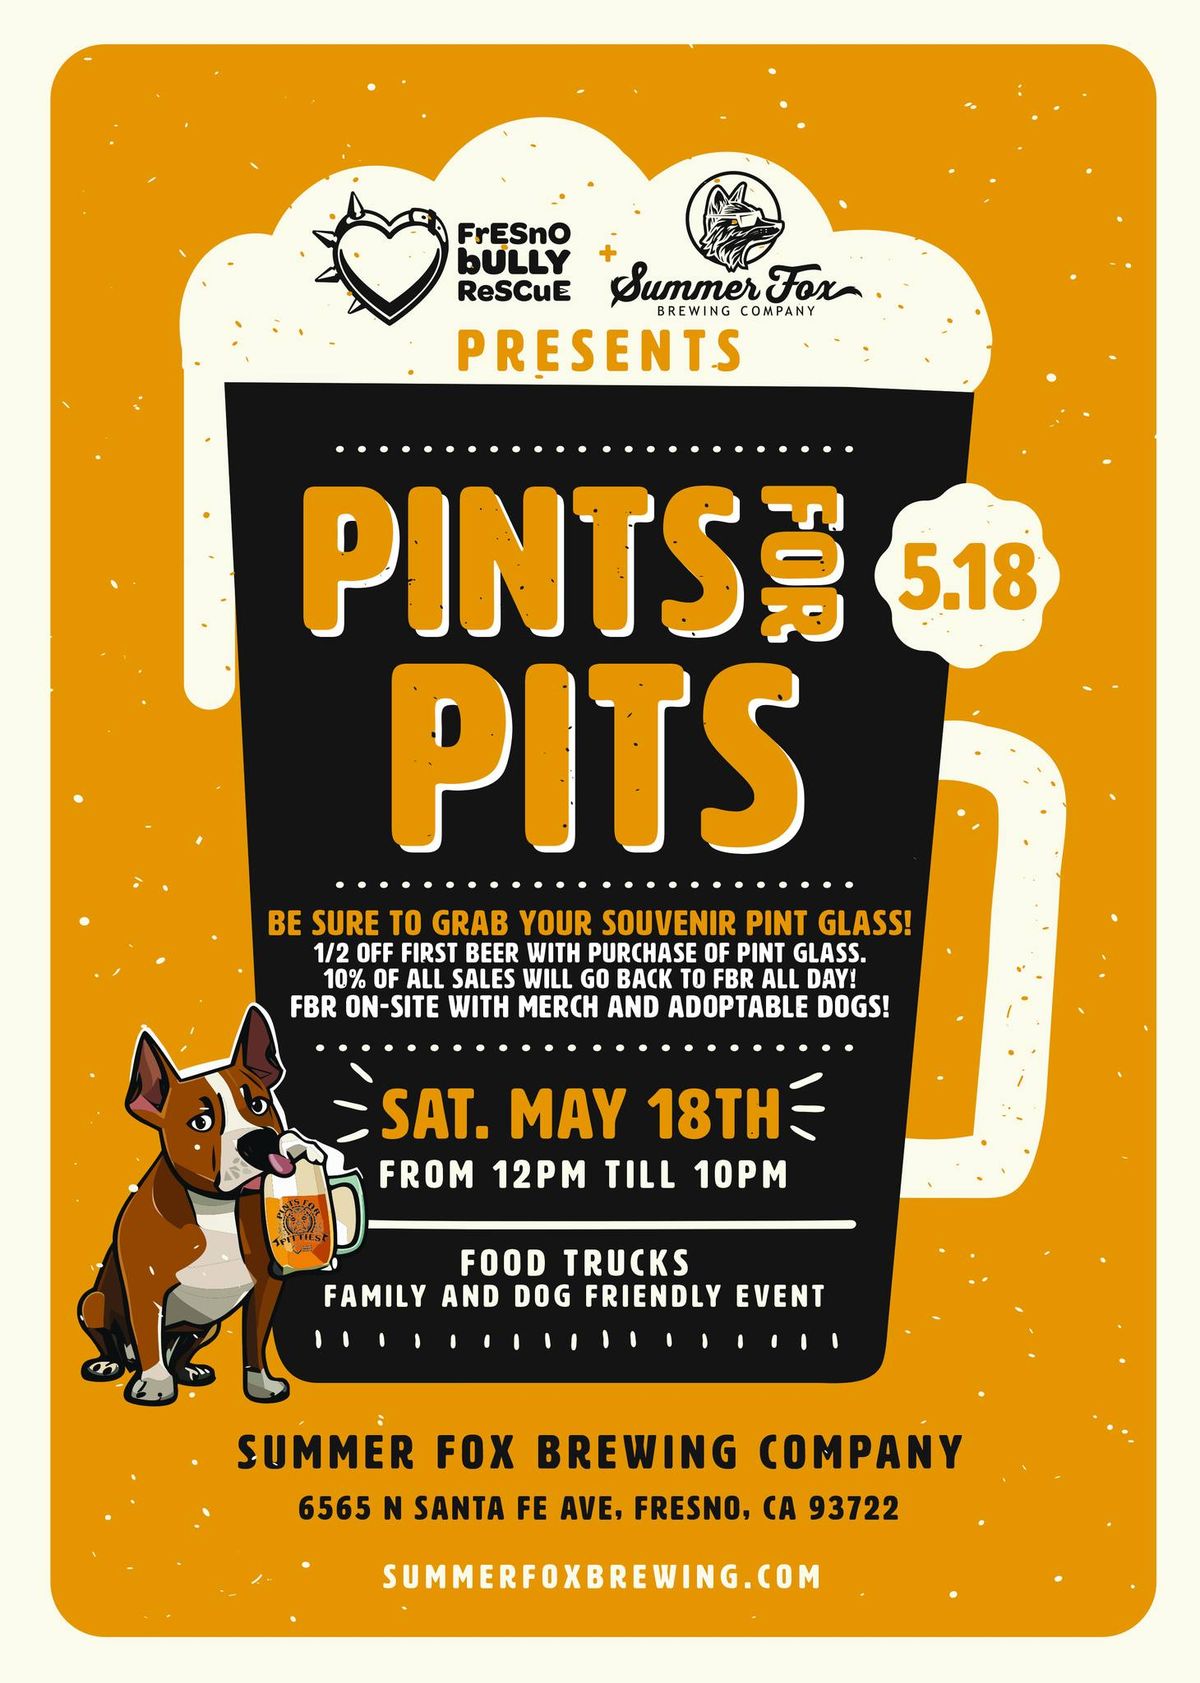 Pints for Pits with Summer Fox Brewing